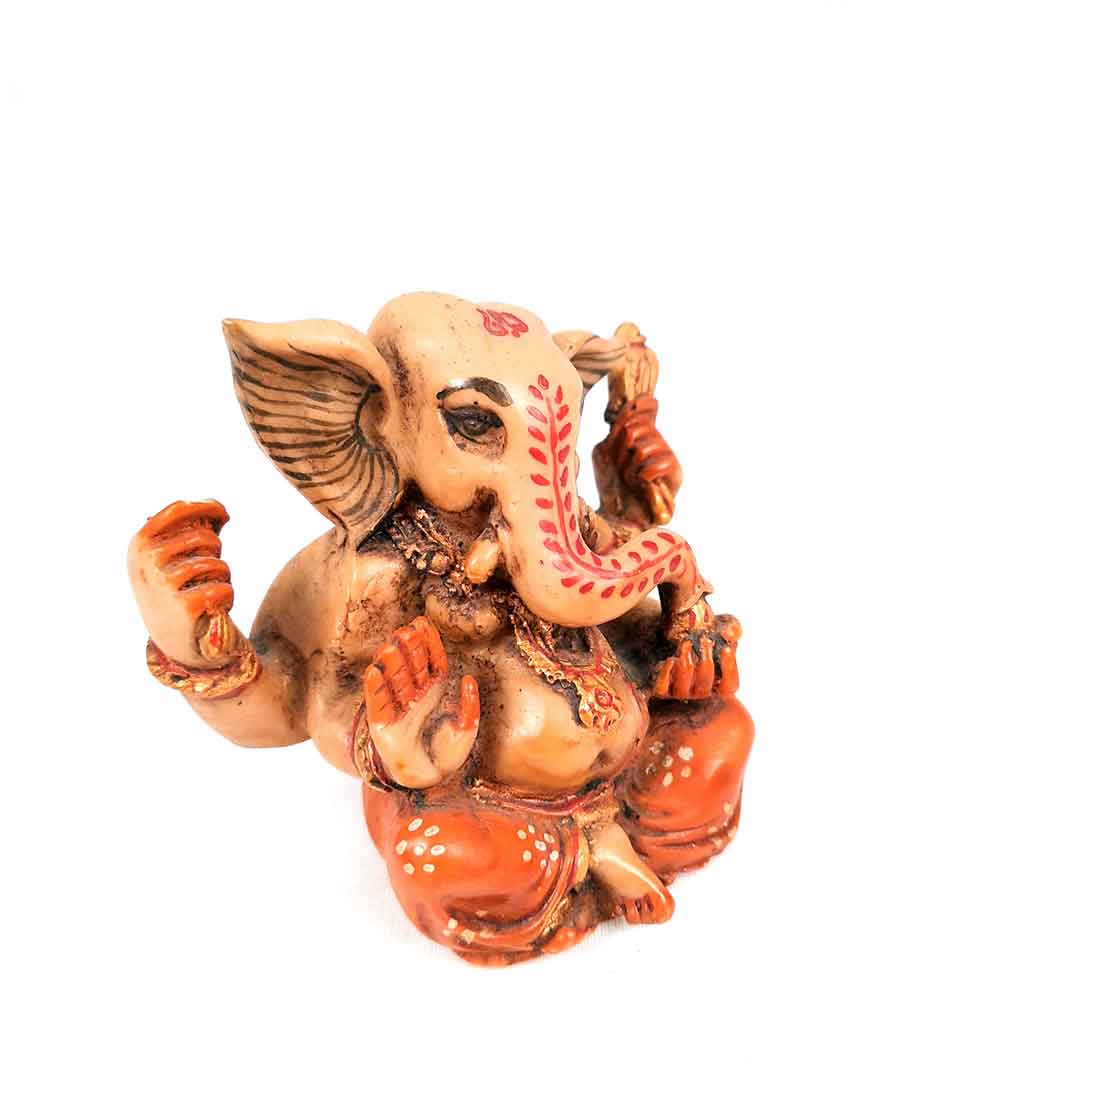 Ganesh Statue | Ganesha Idol Murti - for Puja, Home, Office Desk, Table, Living Room, Car Dashboard Decor & Gifts - 4 Inch